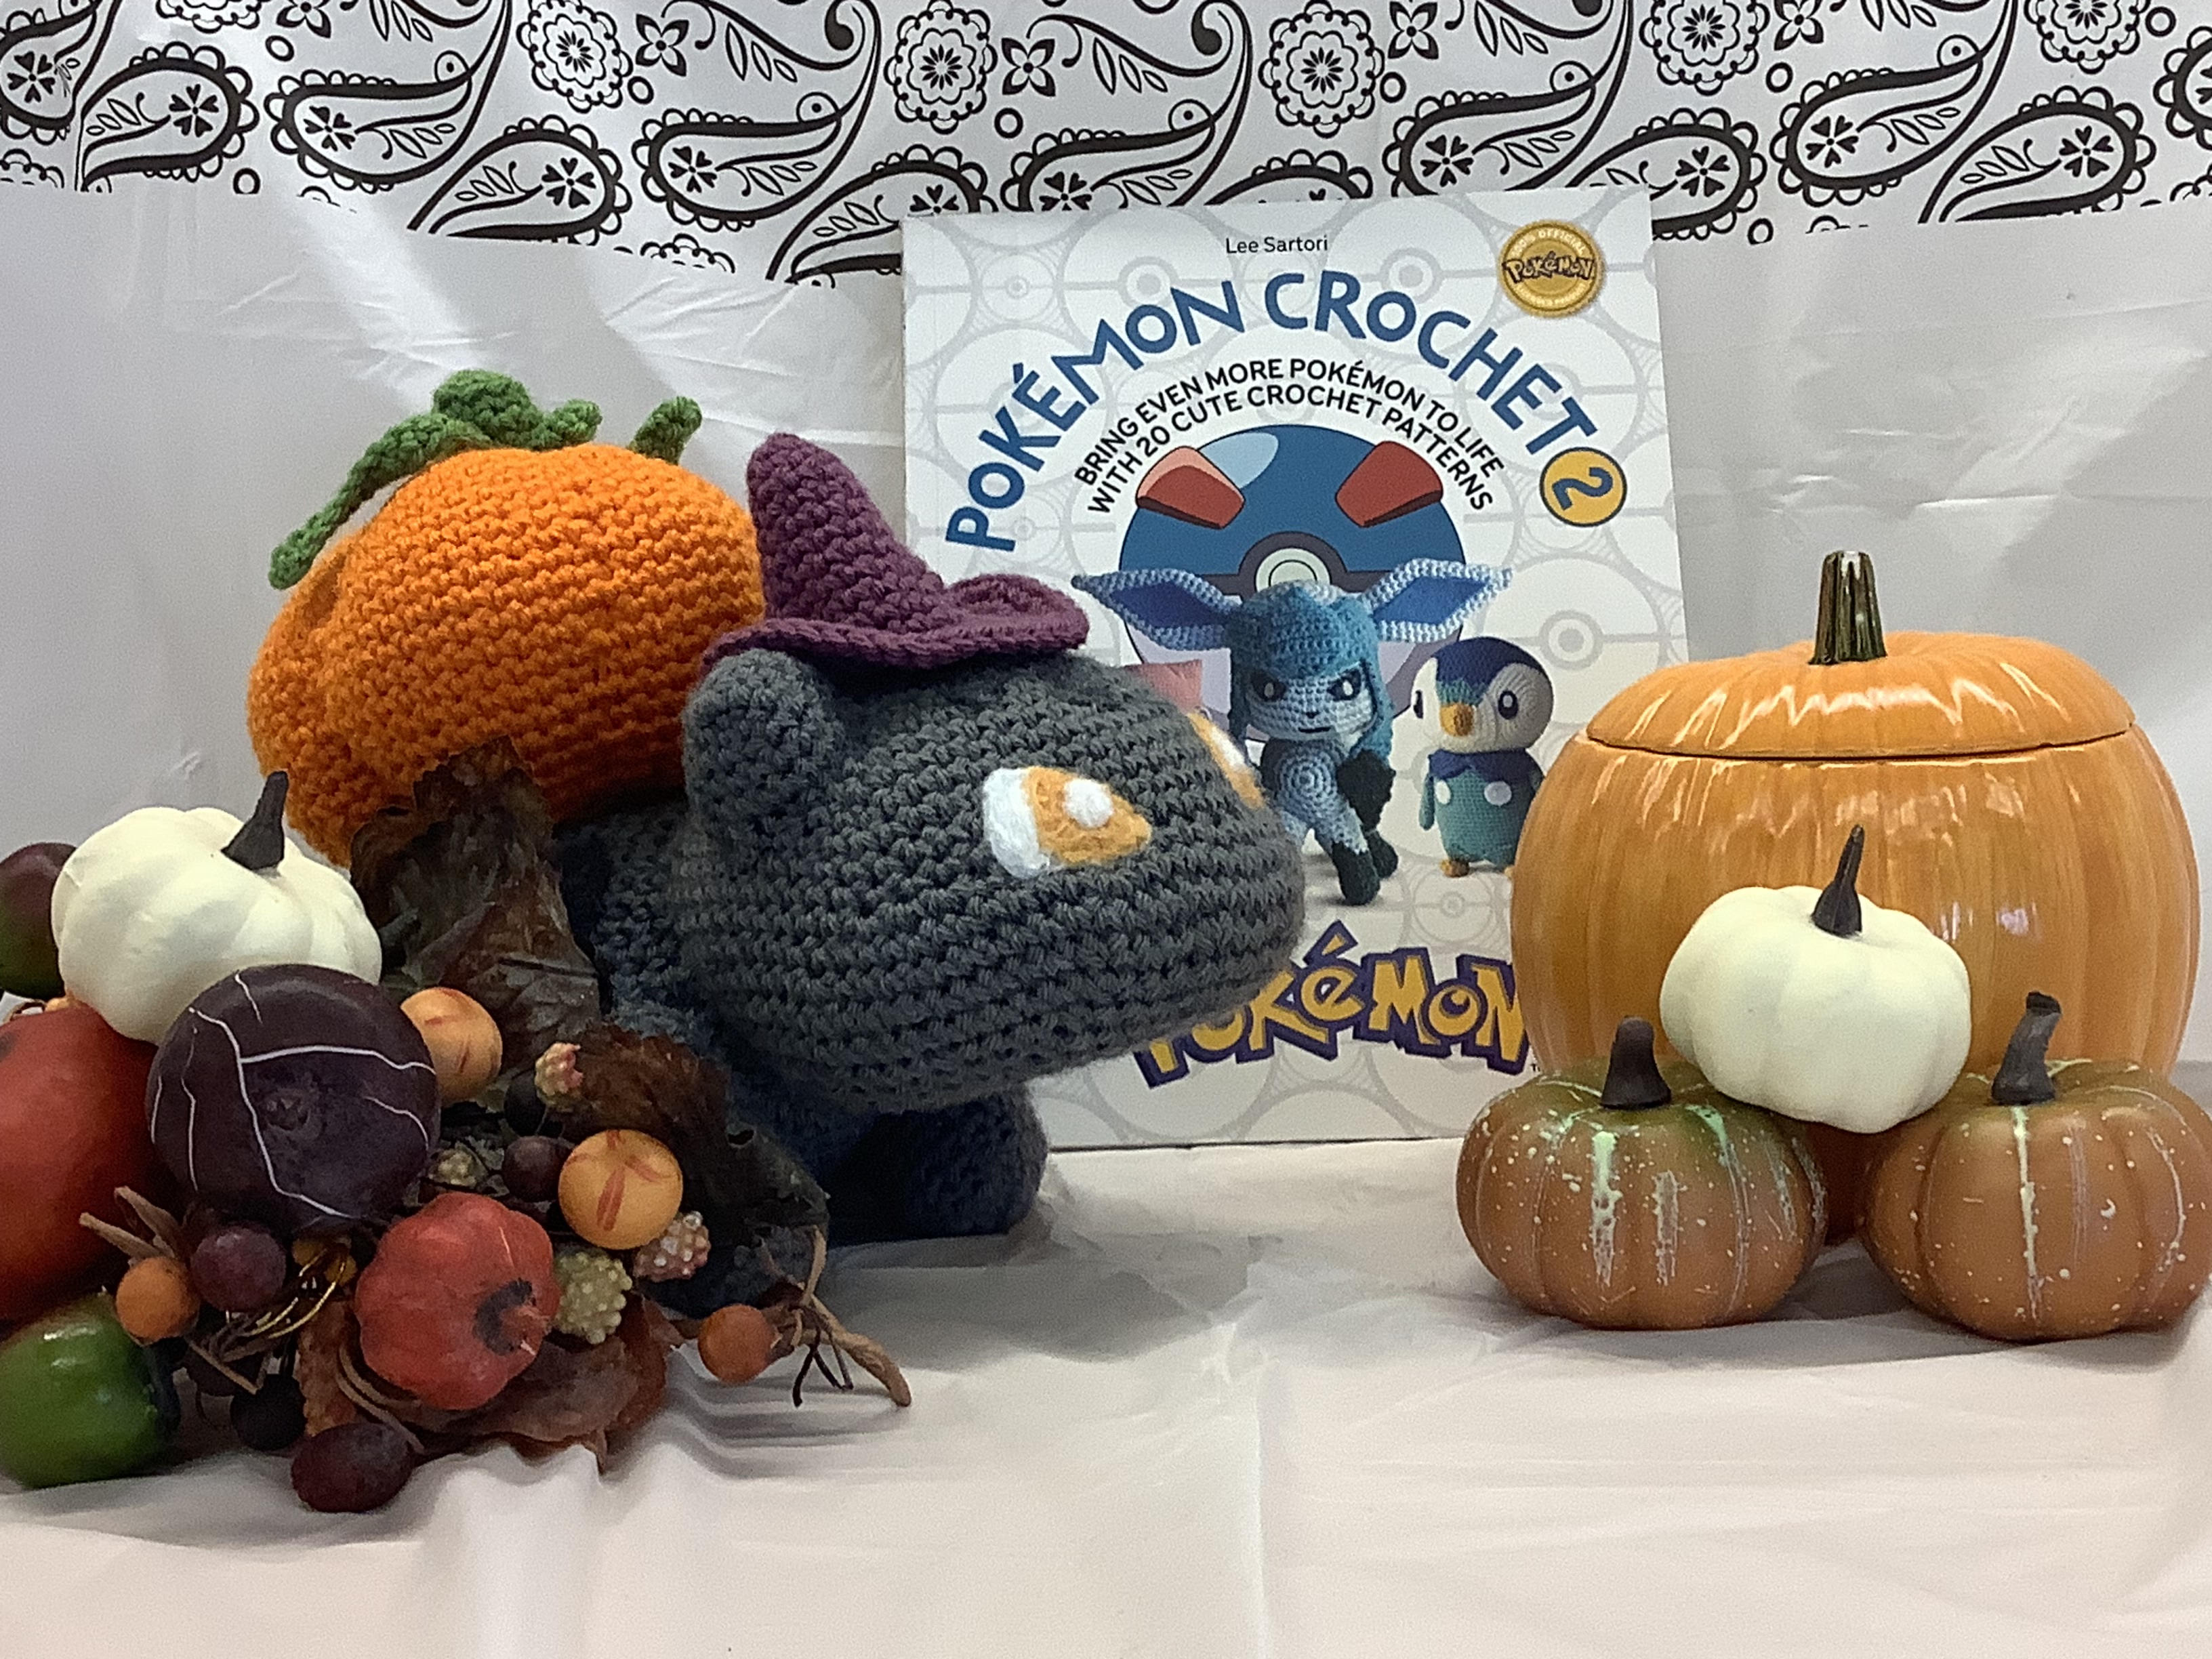 A large crocheted bulbasaur with a witch hat and some ceramic pumpkins next to a book titled Pokemon Crochet